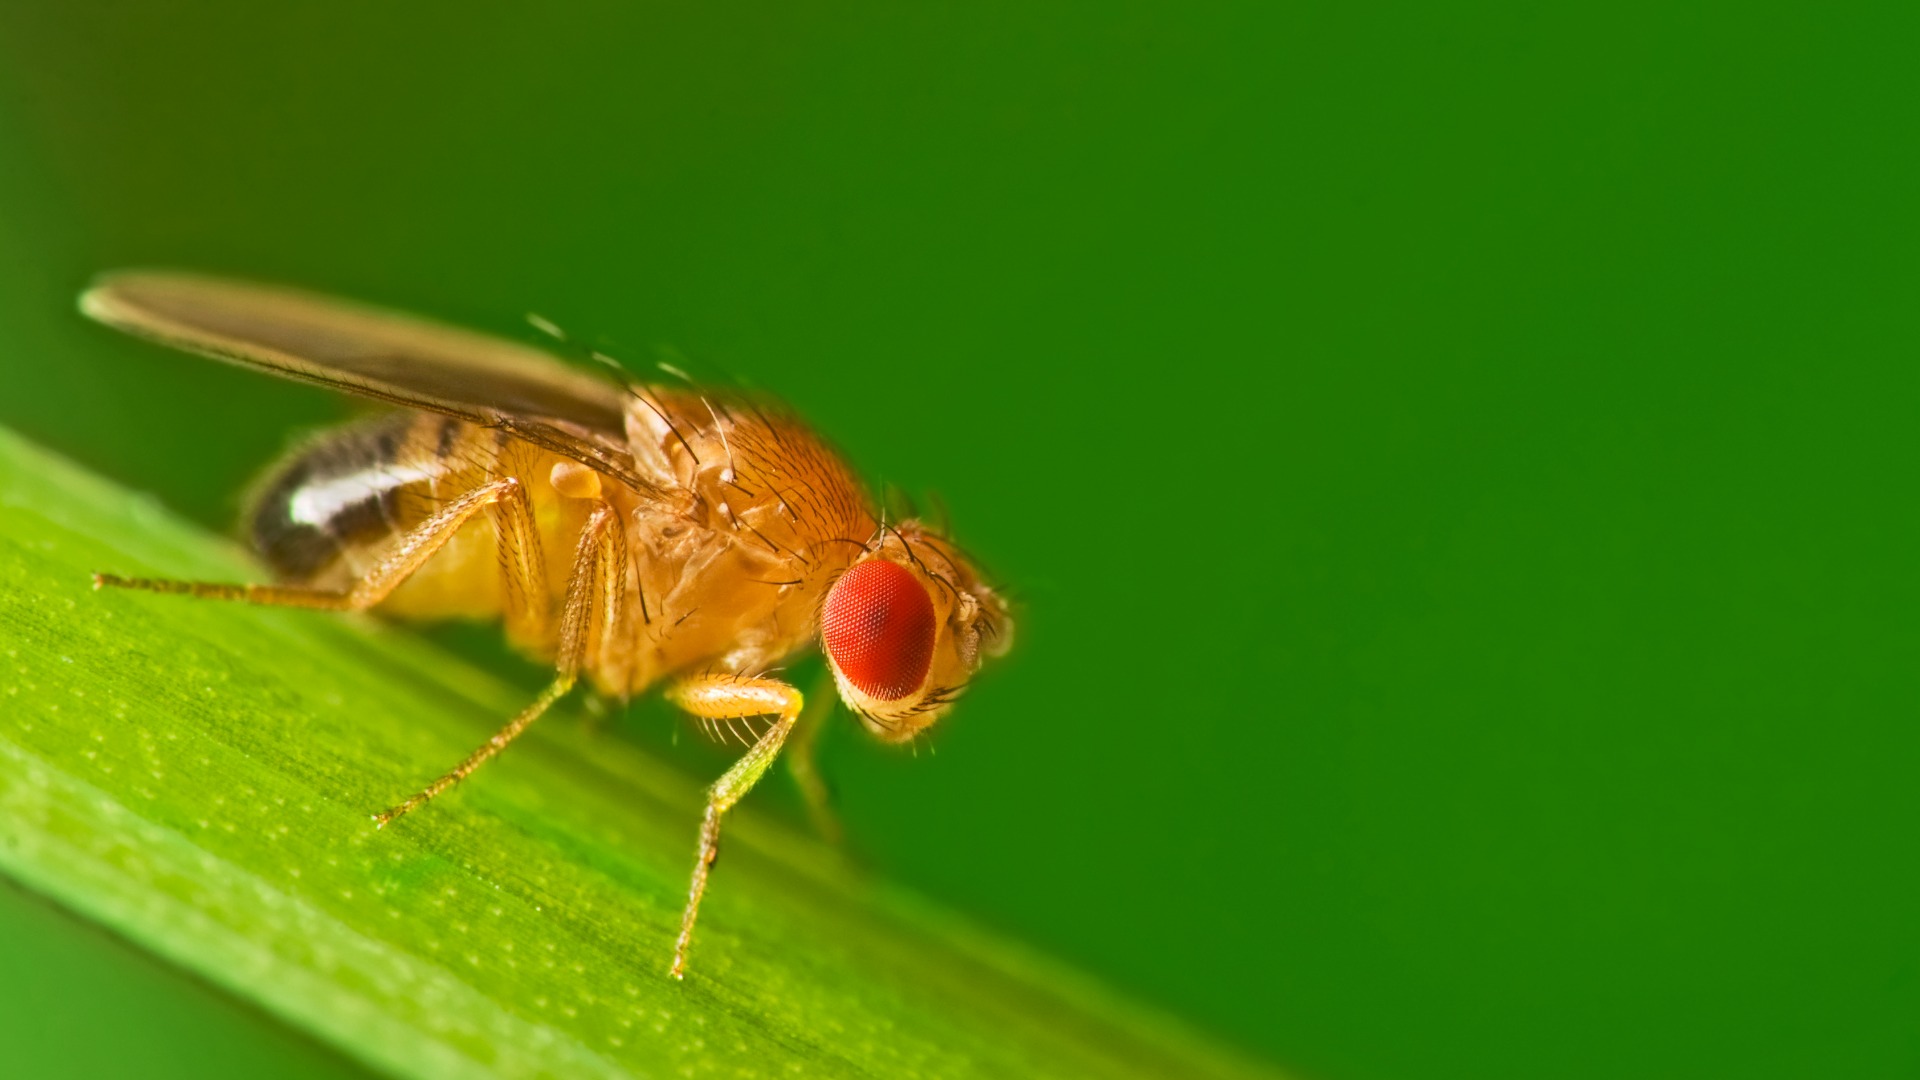 A male fruit fly perched on a blade of grass